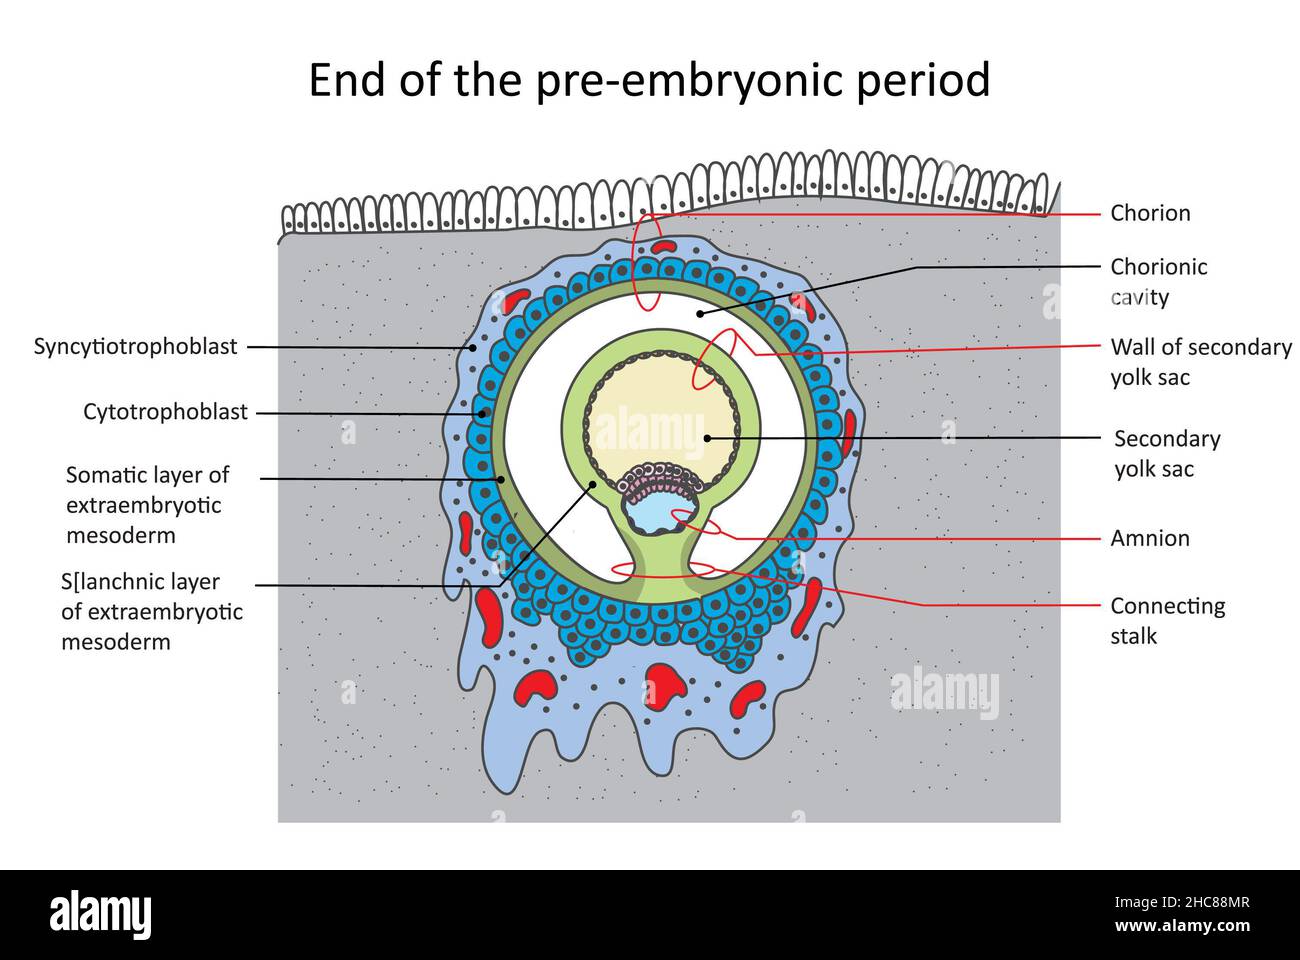 Structure of the embryo at the end of the pre-embryonic period Stock Photo